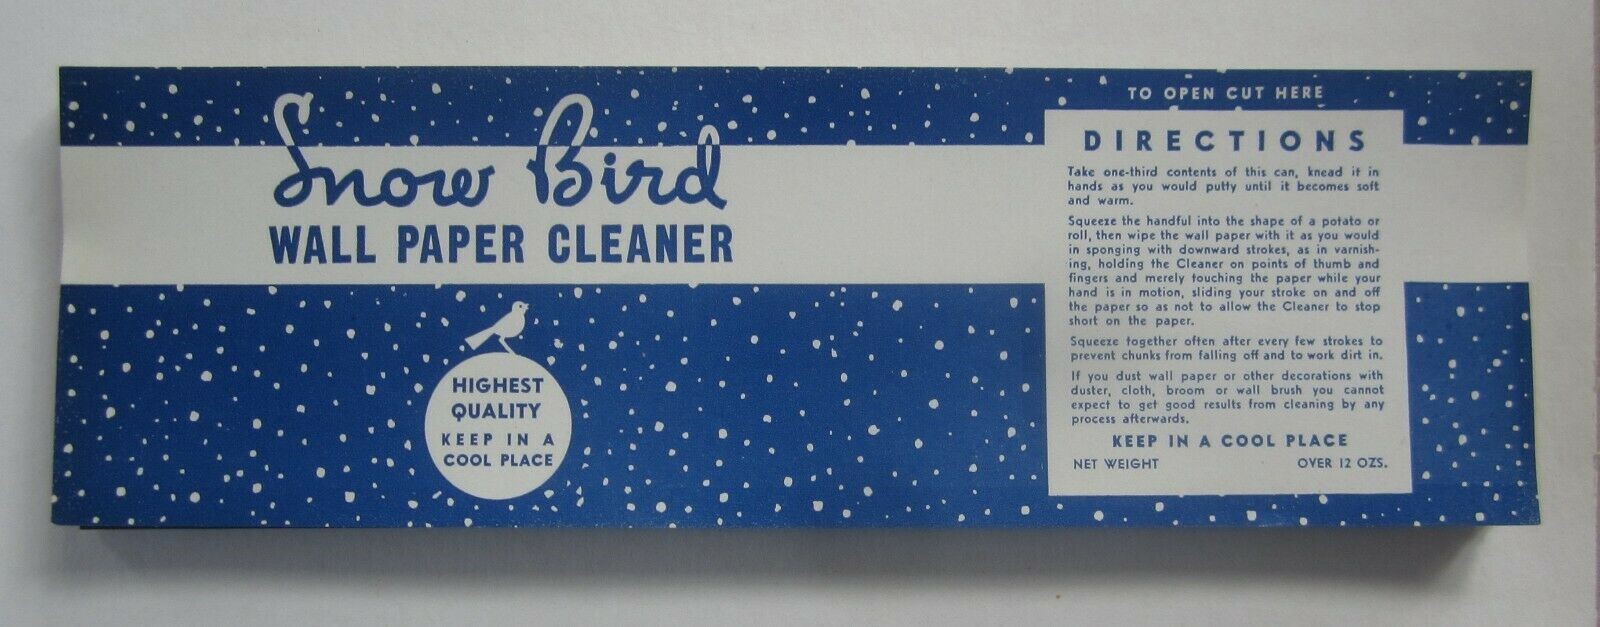  Lot of 100 Old Vintage - SNOW BIRD - WALL PAPE...